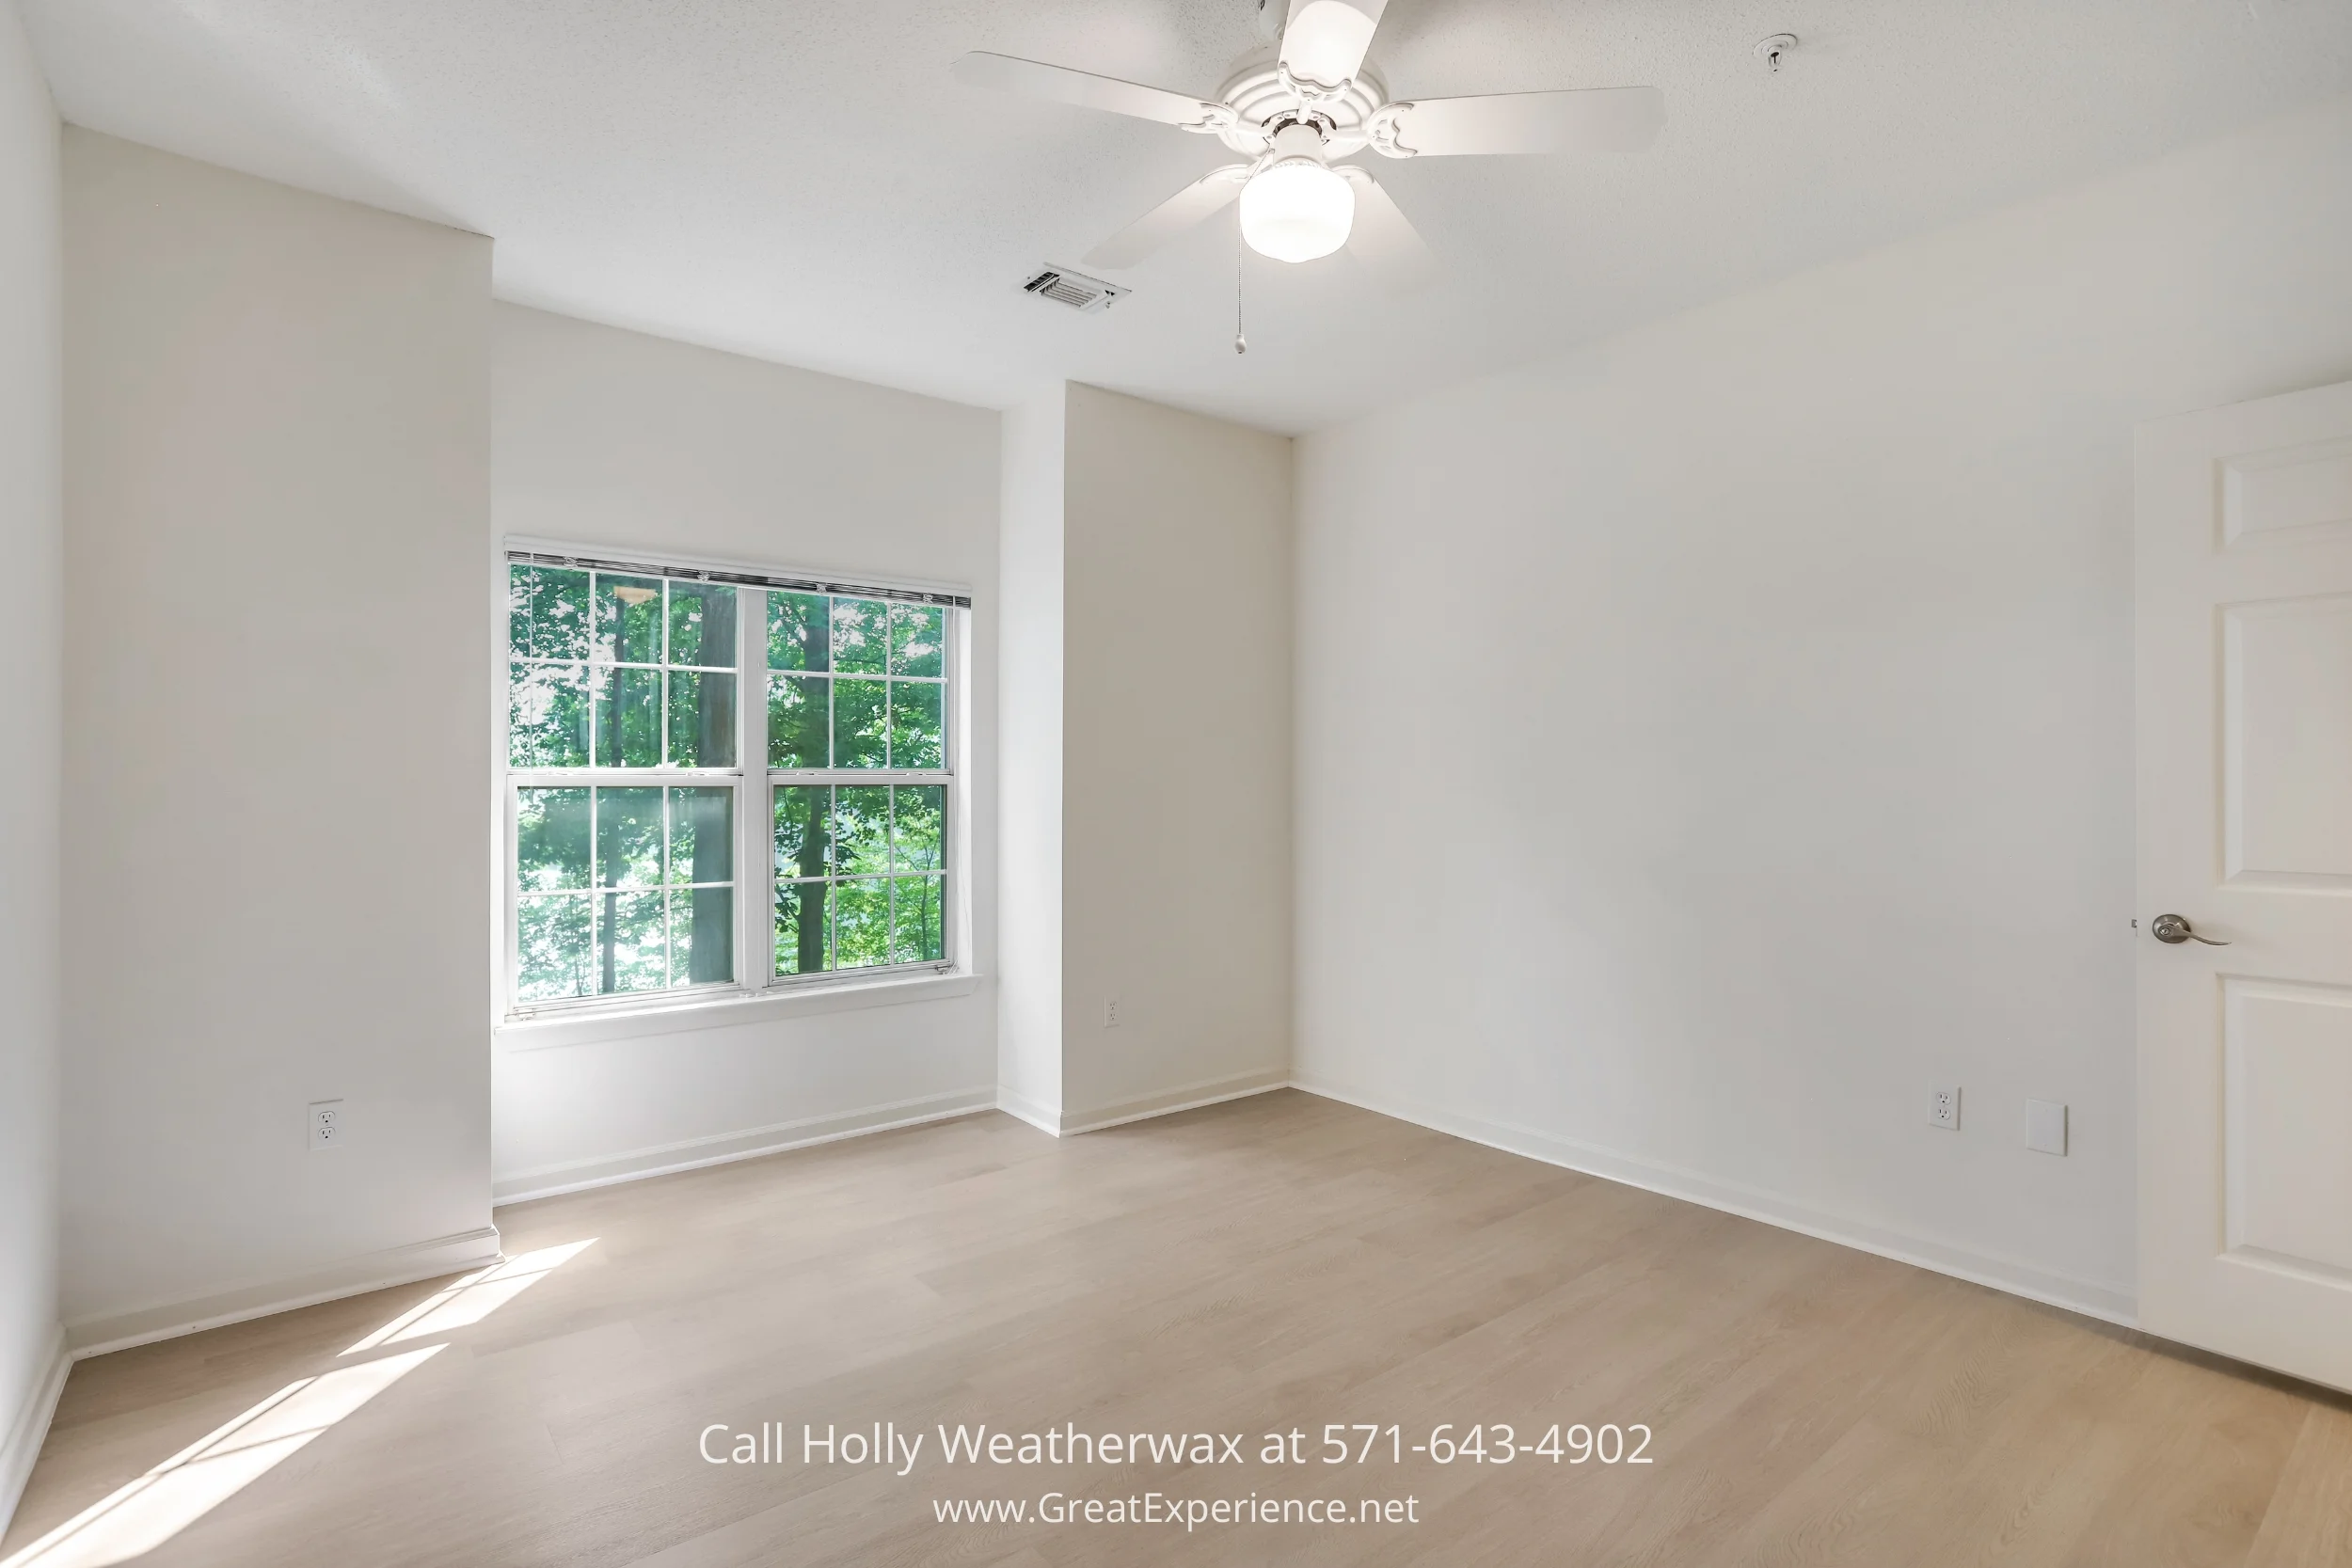 An empty room with white walls and wood floors